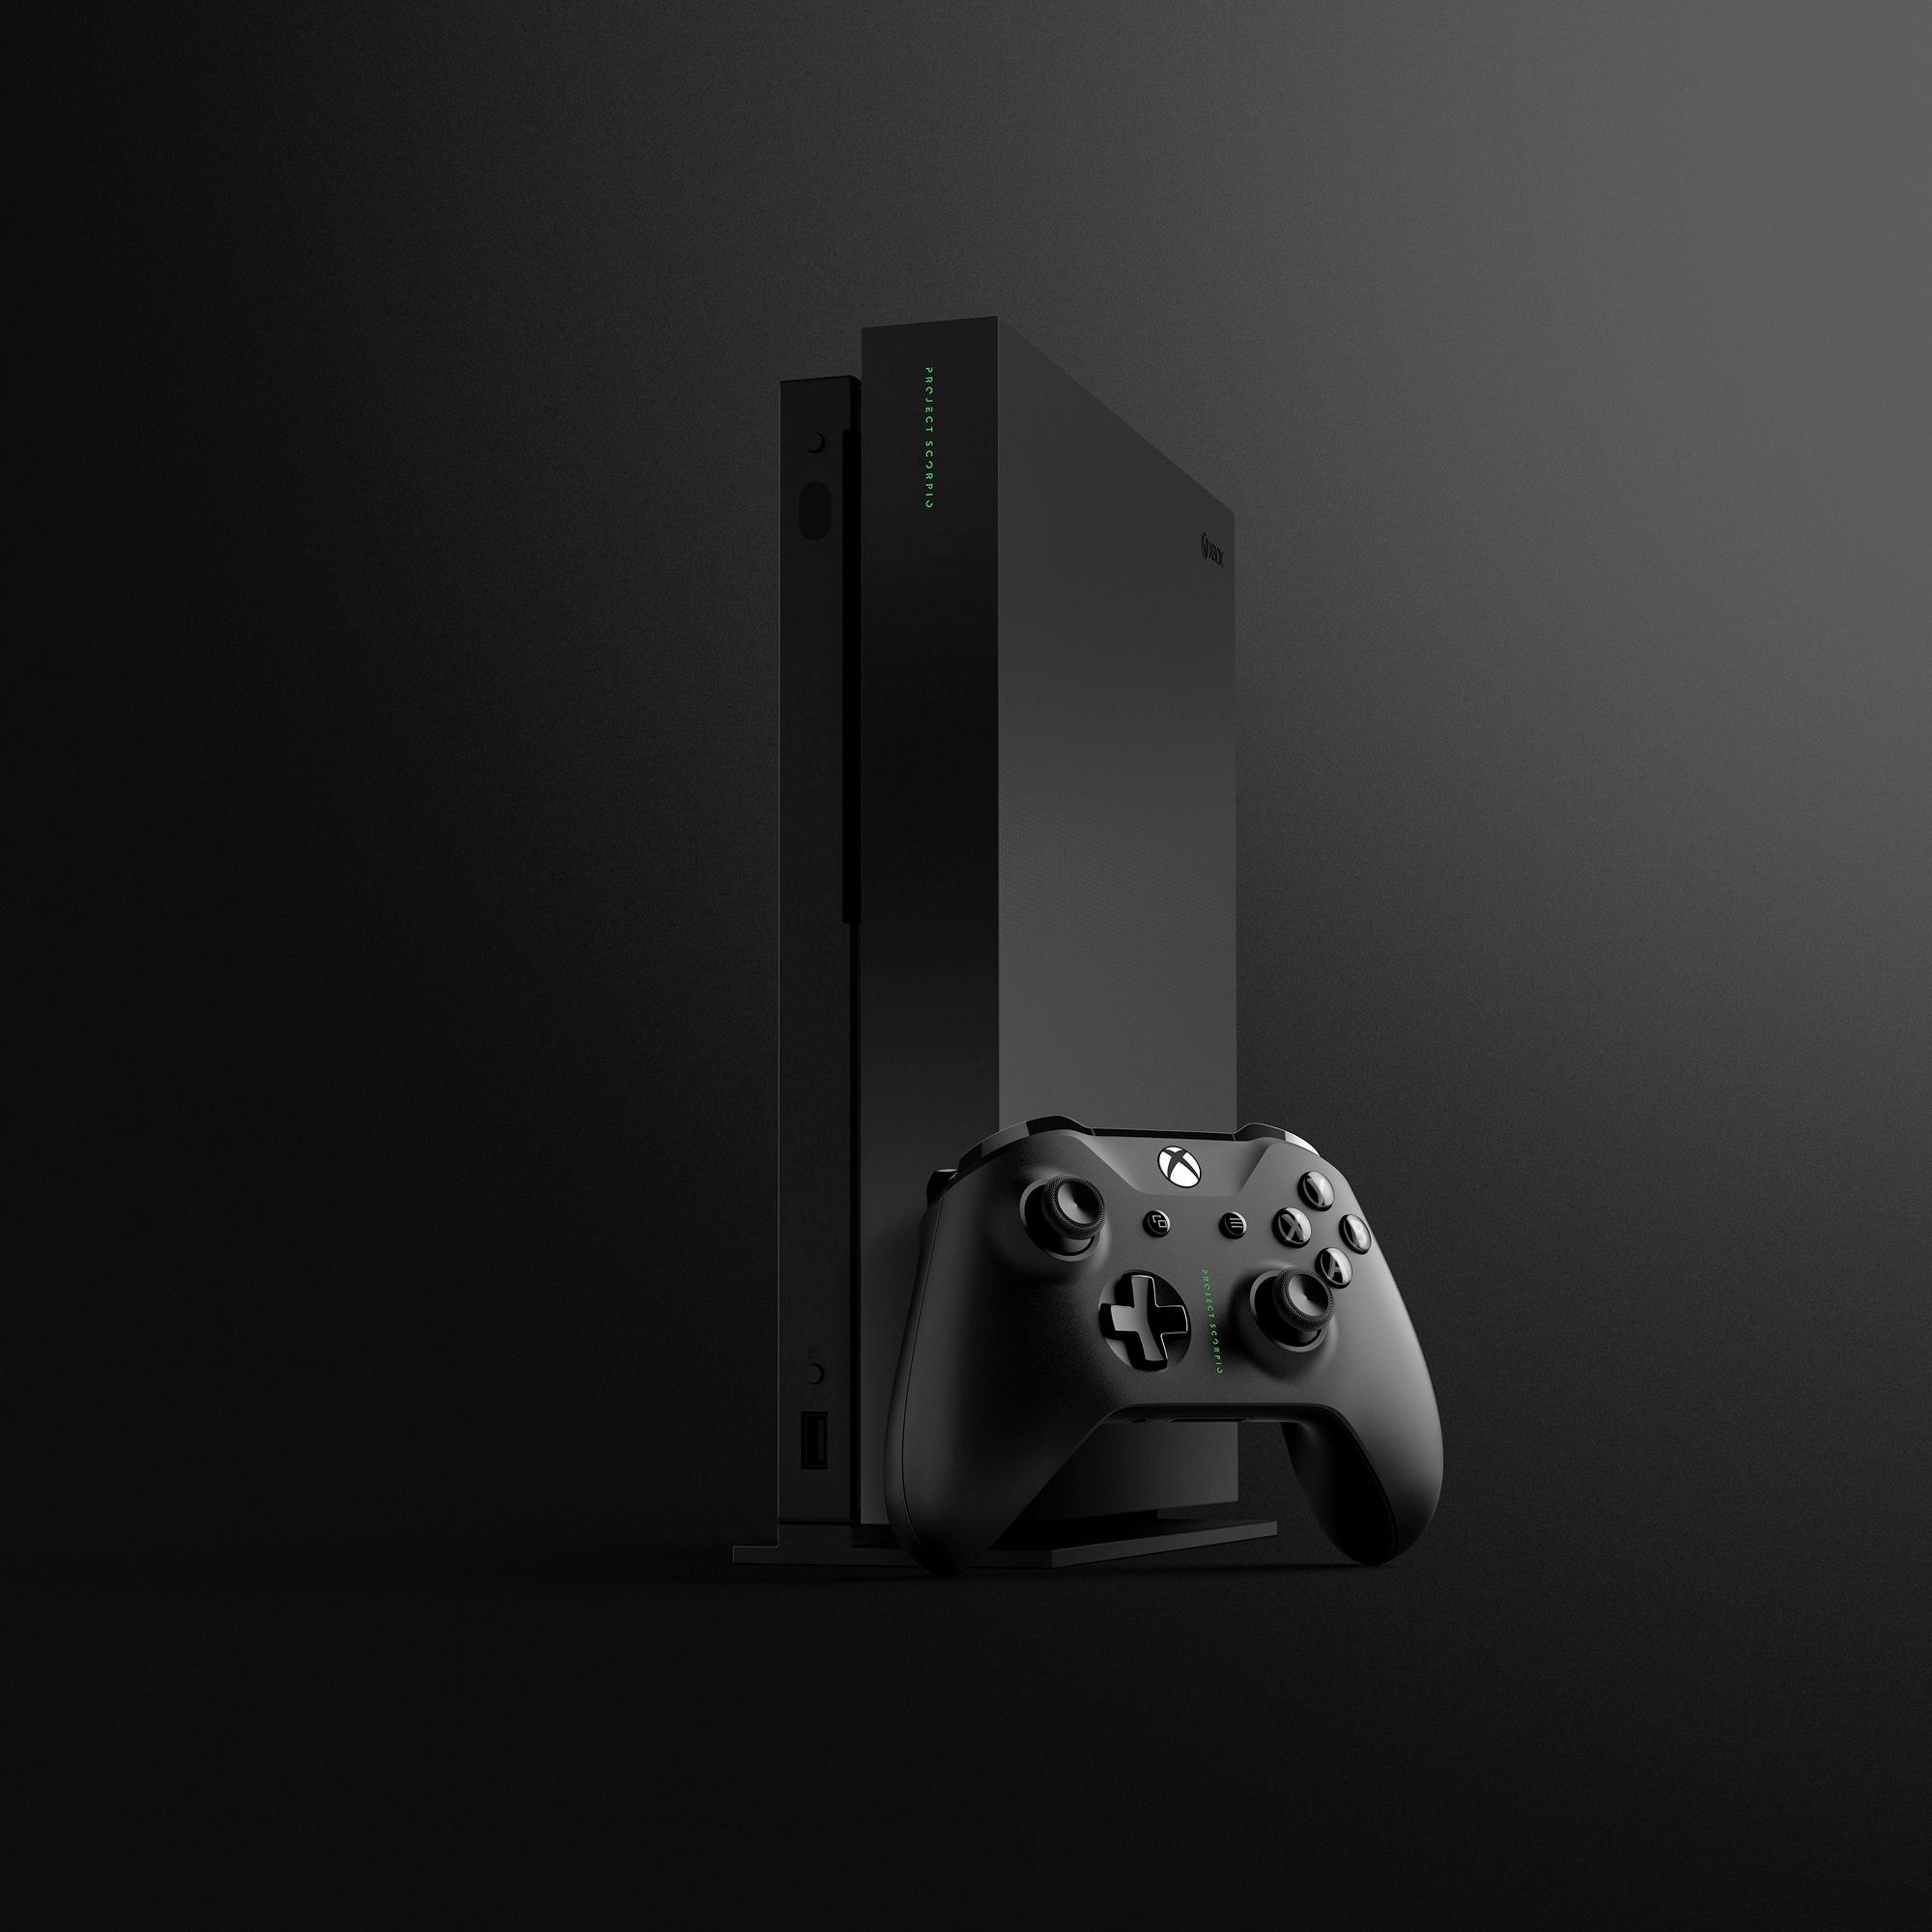 Microsoft Xbox One X review: It's the most powerful console you